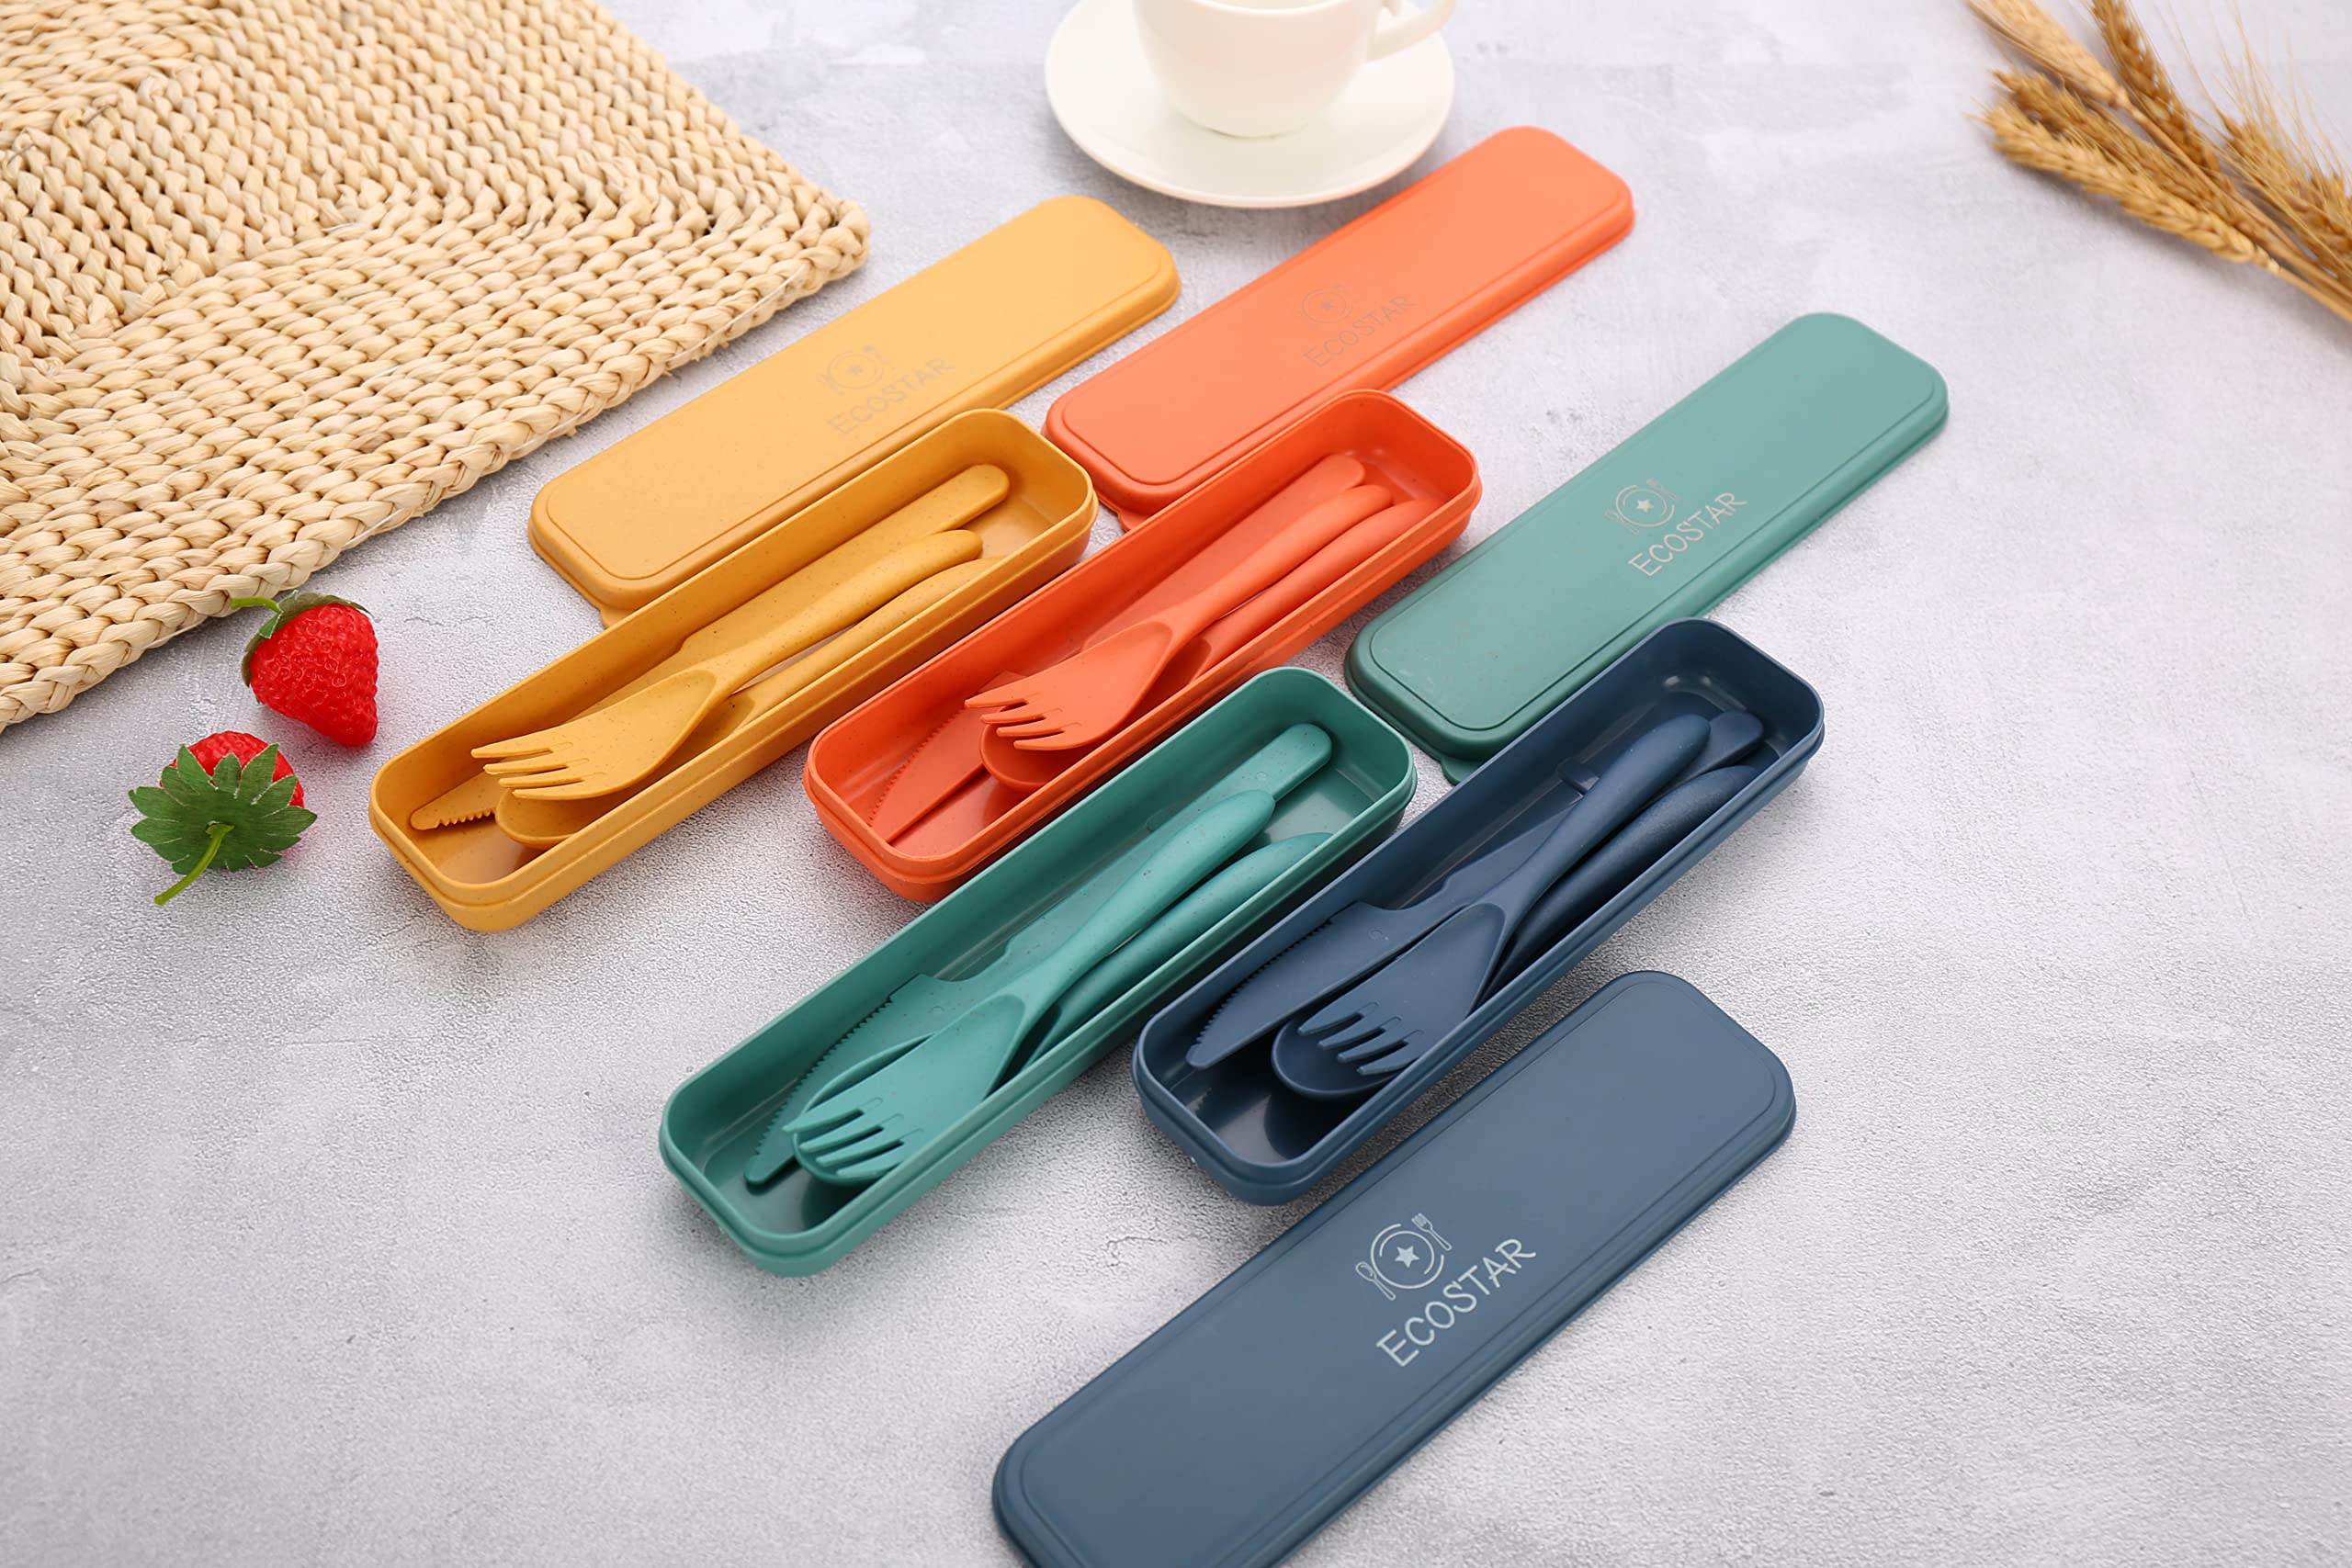 ECOSTAR Reusable Utensils set with Case, Portable Wheat Straw Cutlery Set, BPA-Free and Eco-friendly Knife Spoon Fork, Travel Utensils for Office, Dorm, and On-the-go (Coral, 4)